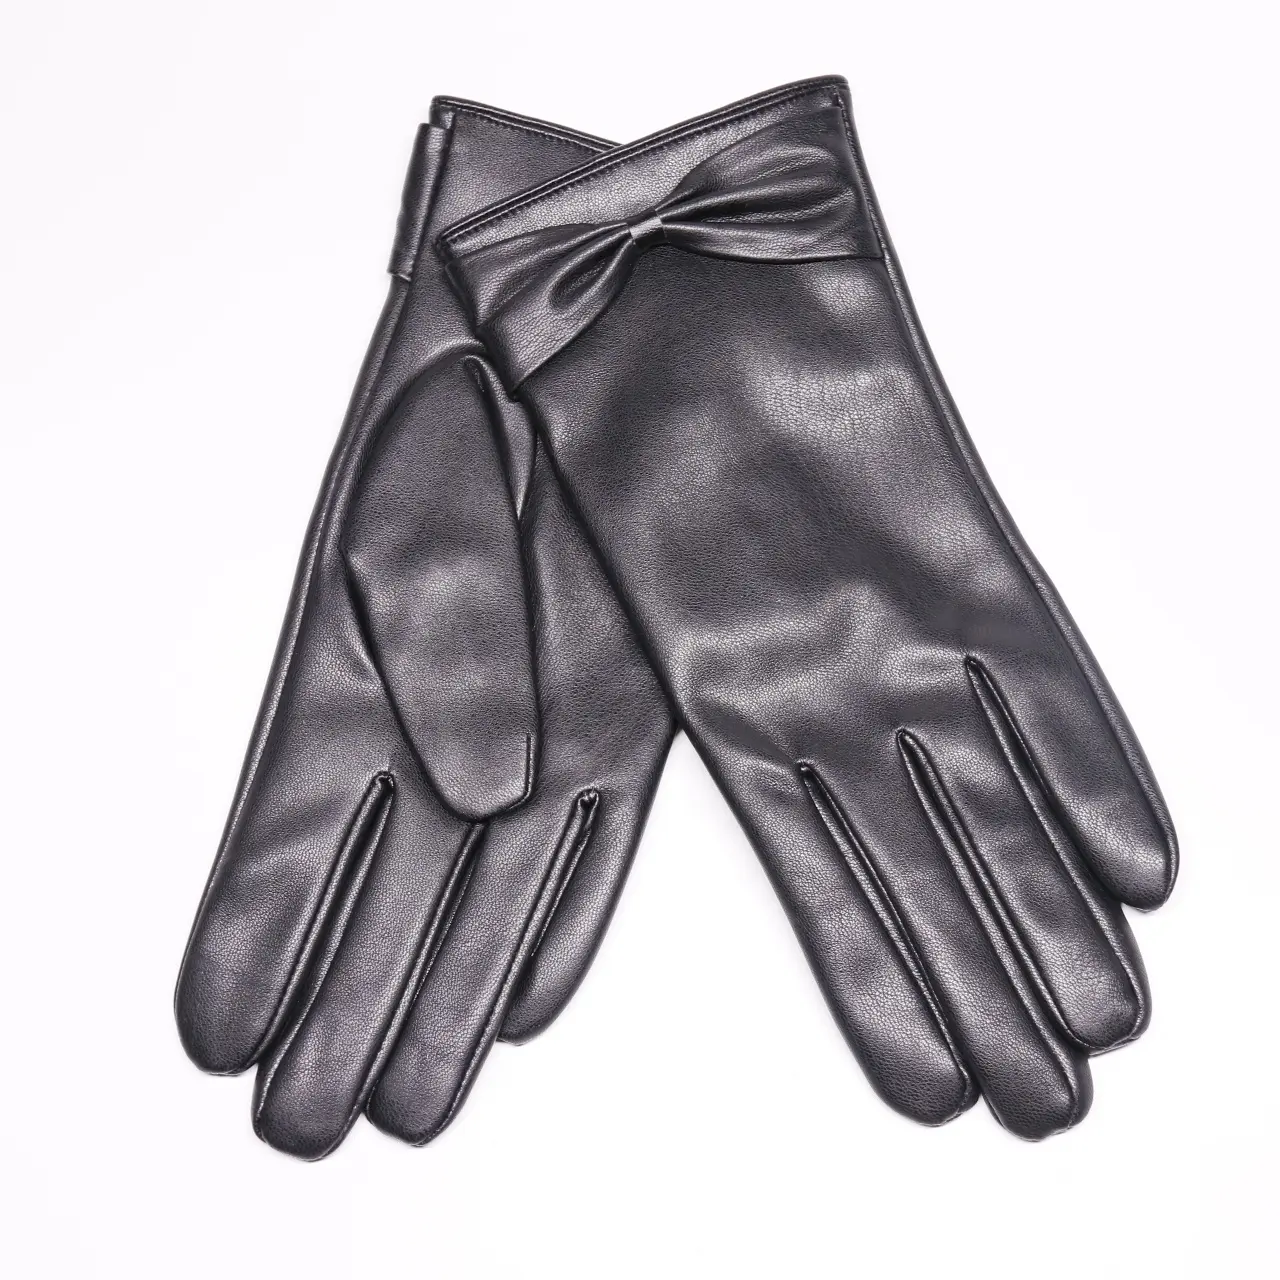 Ladies Fashion Dress Party Leather Gloves Latest Fine Fashion Winter Touch Screen PU Black Plain Daily Winter Gloves for Men